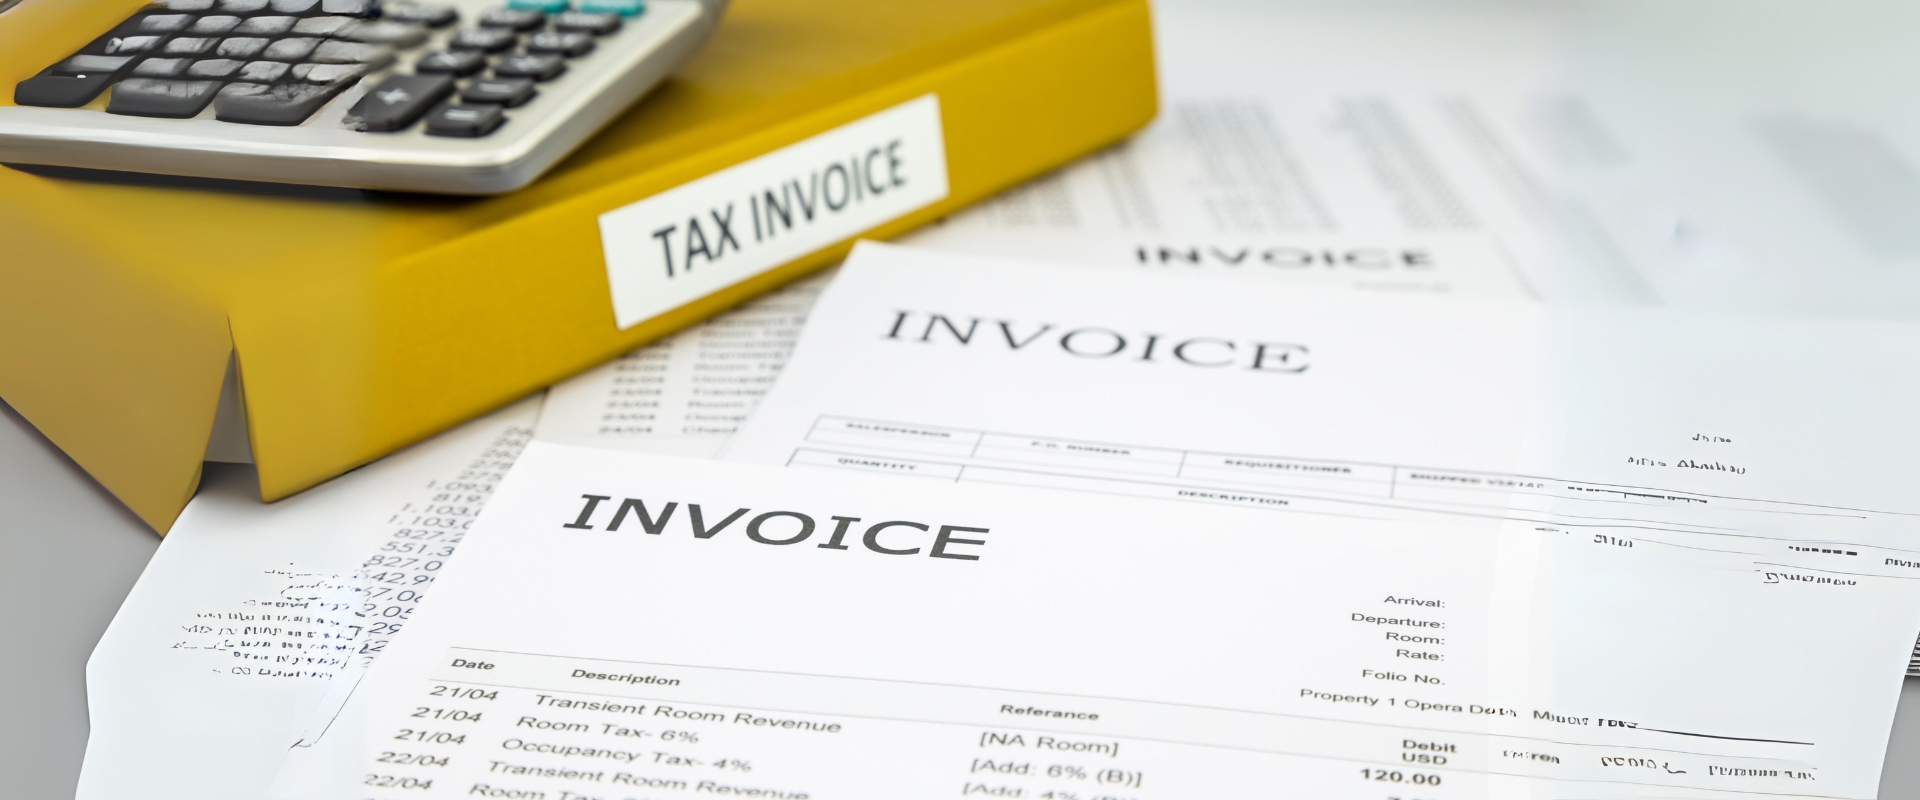 Check This Out! The Importance of Accuracy in Preparing Tax Bills